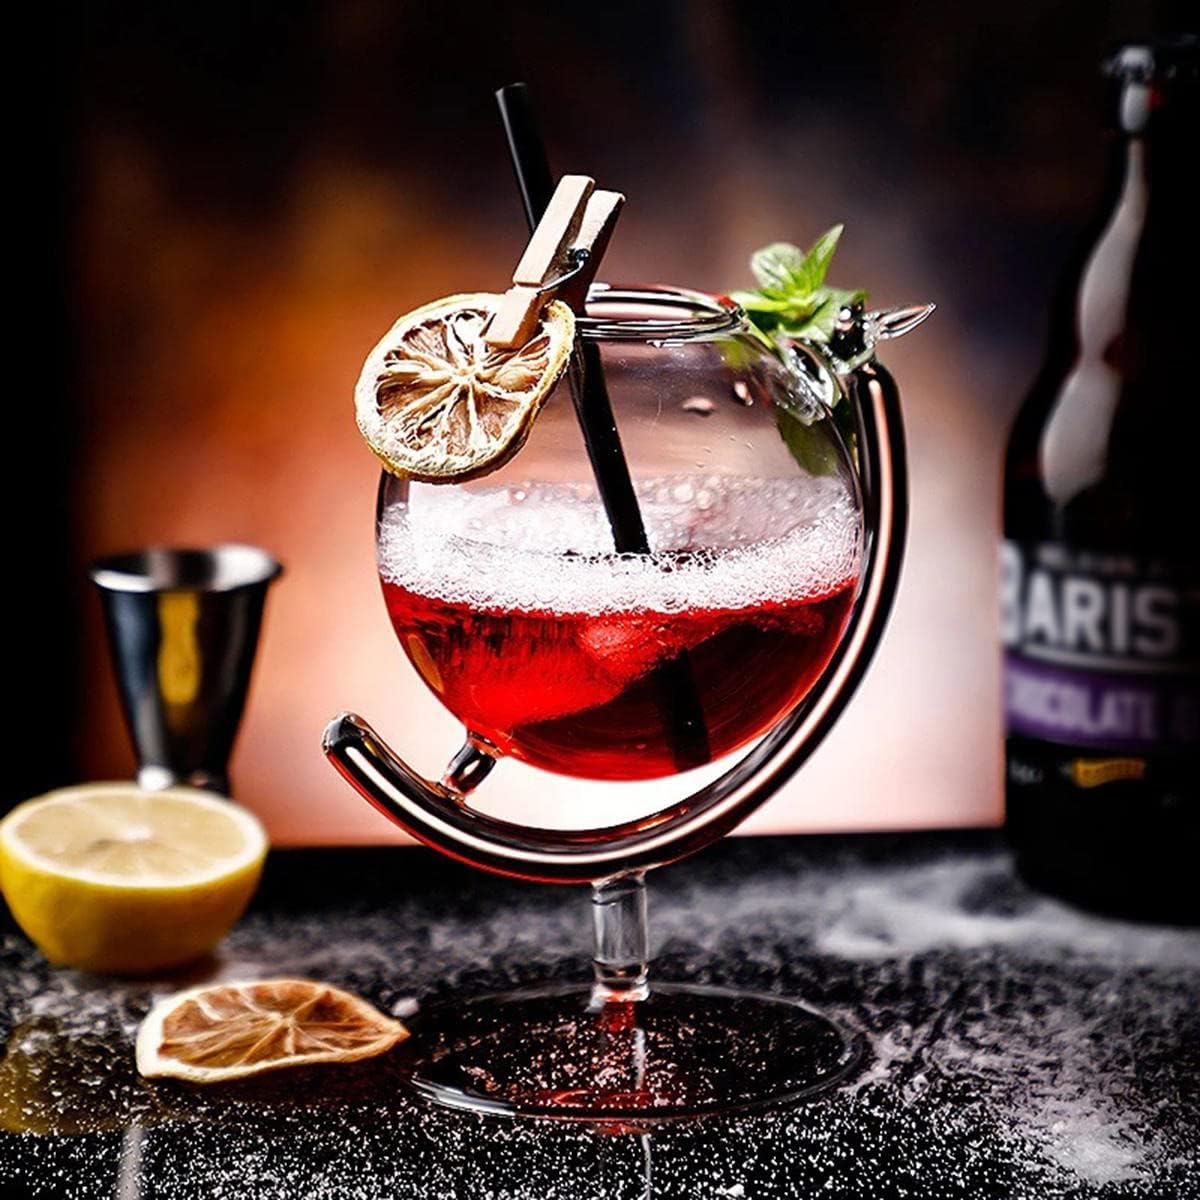 Indulge in luxury wine accessories and barware without the worry of shipping costs and elevate your home bar with high-quality items including crystal glassware.